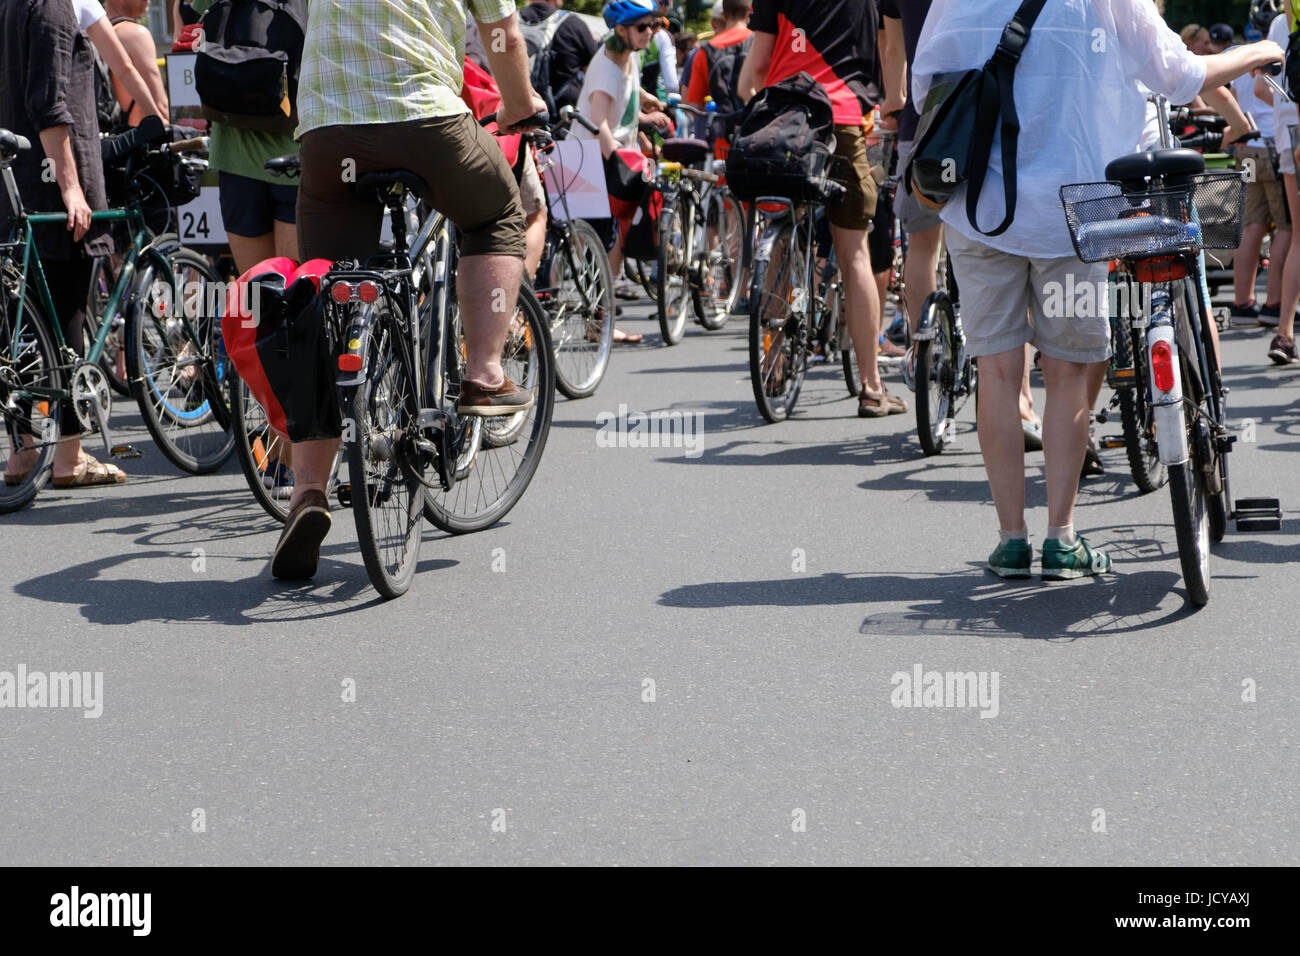 Many people on bicycles on on street from behind Stock Photo